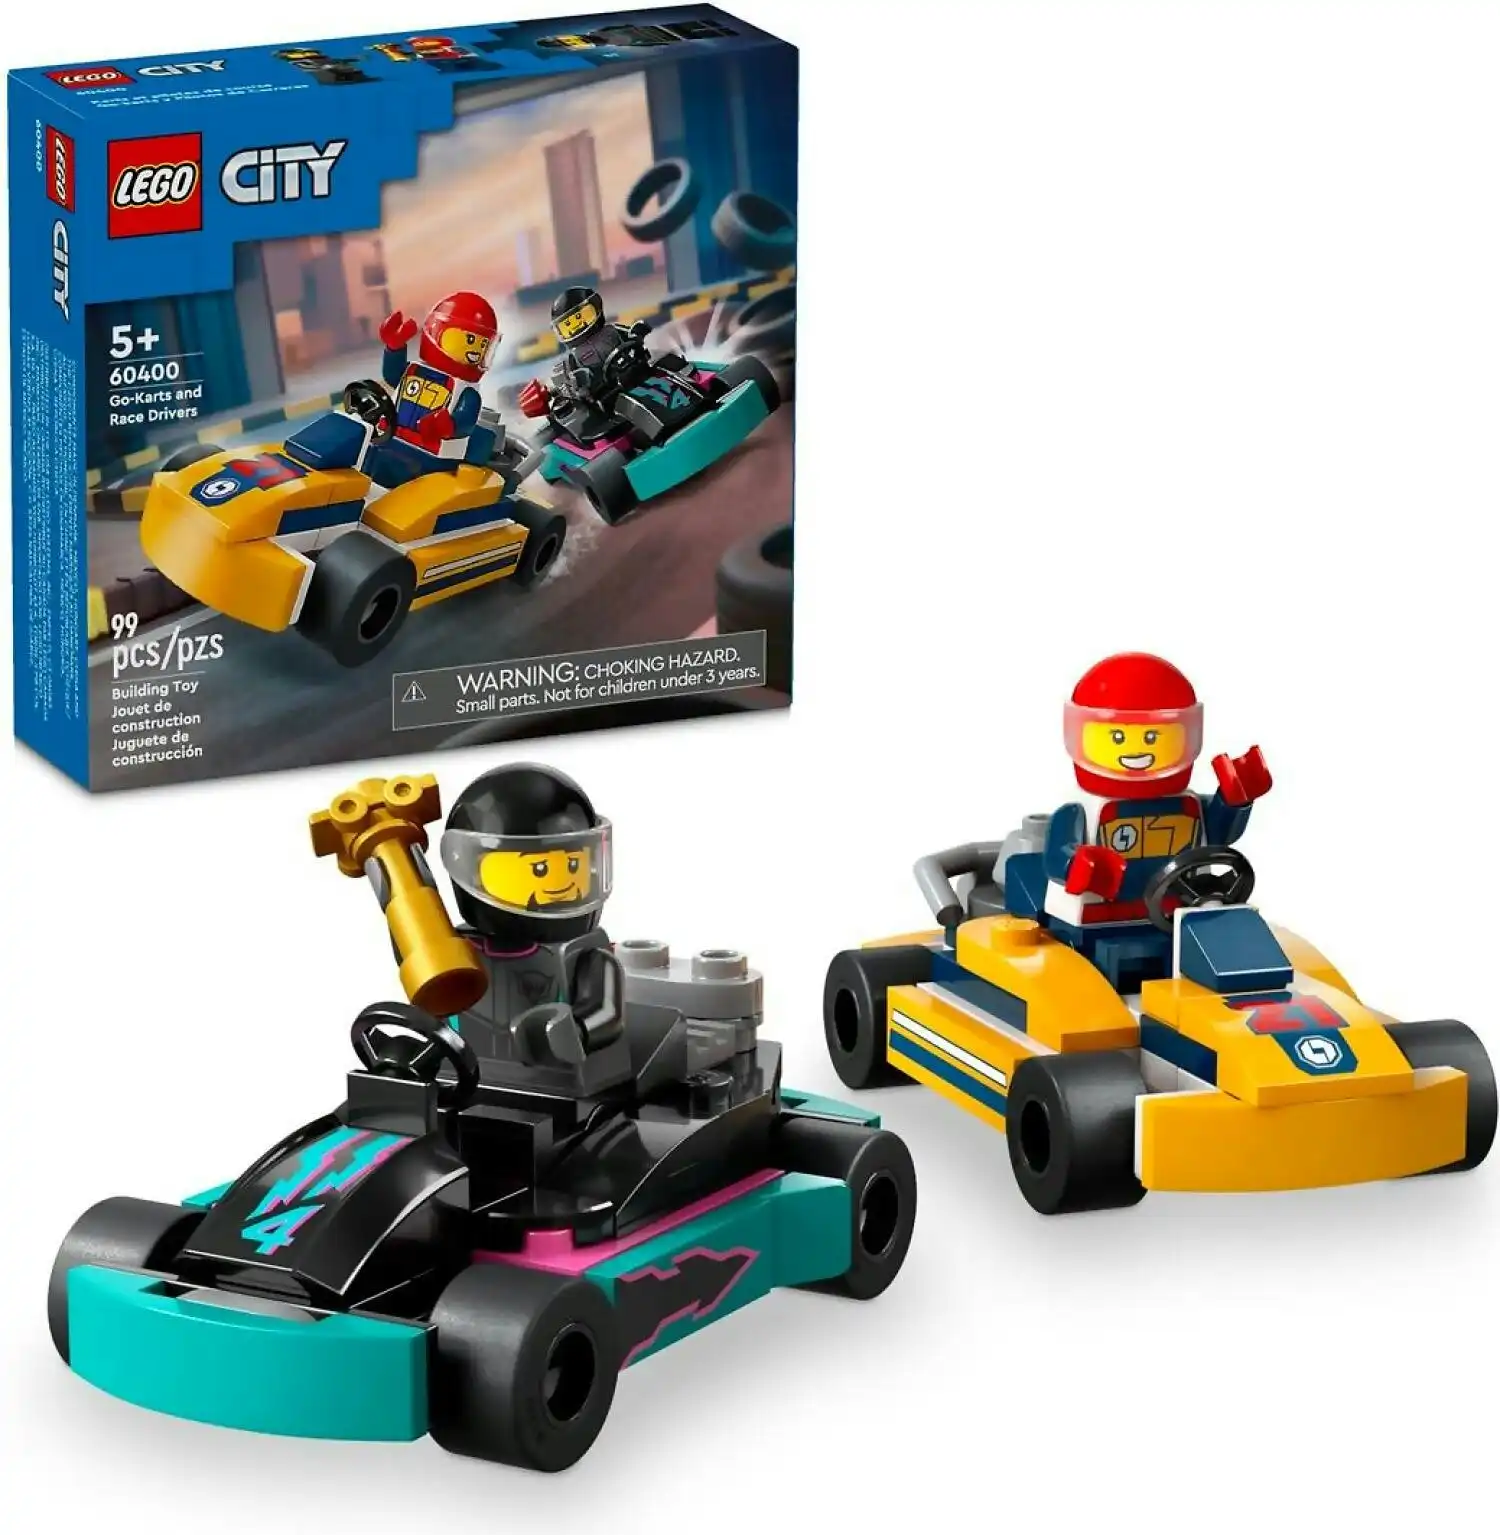 LEGO 60400 Go-Karts and Race Drivers - City